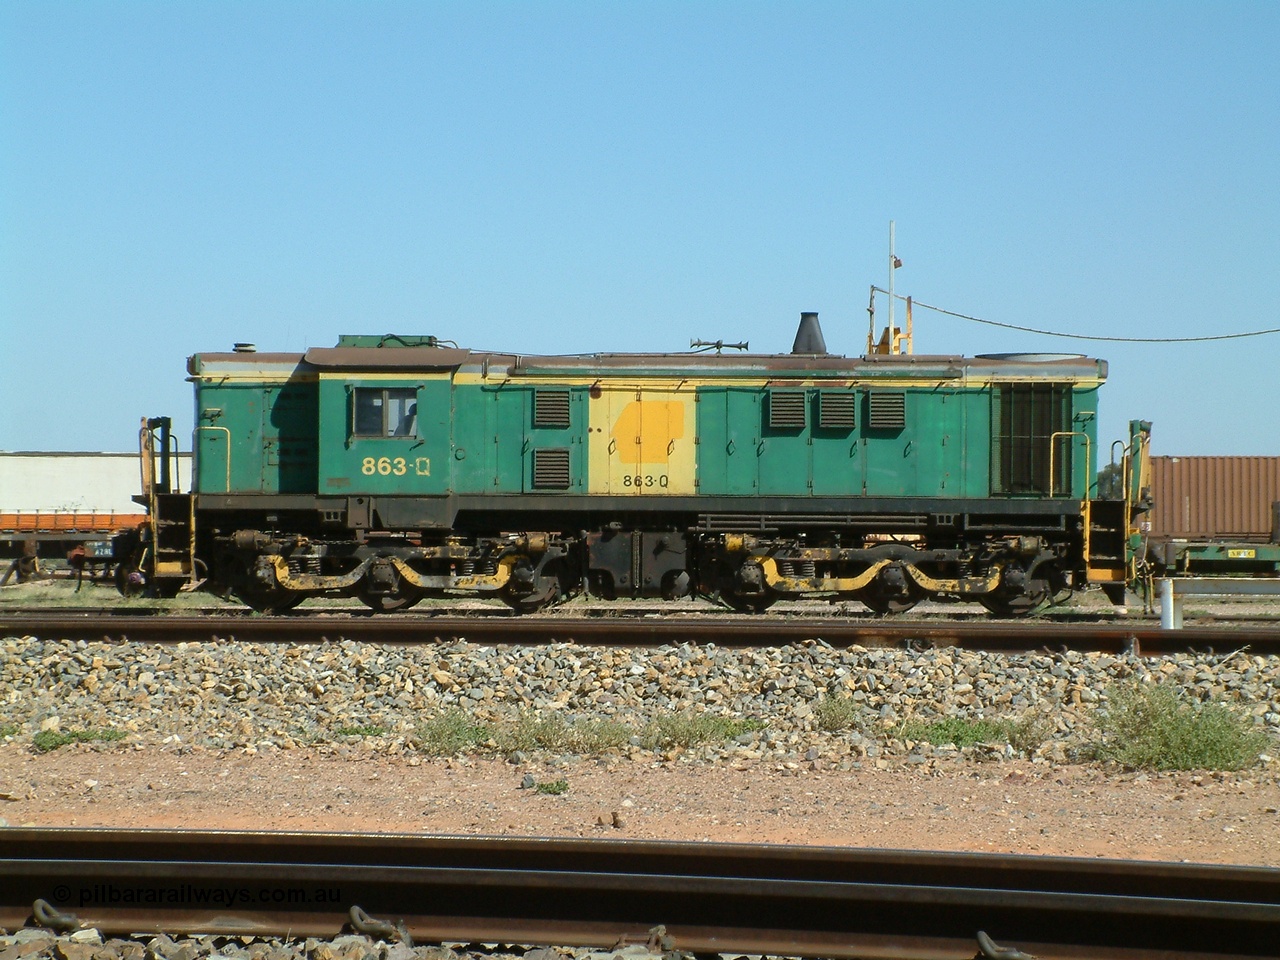 030404 103031
Port Augusta, Spencer Junction shunt loco 830 class unit 863 serial 84709 is an AE Goodwin built ALCo DL531 model and entered service in June 1963. 4th April 2003.
Keywords: 830-class;863;AE-Goodwin;ALCo;DL531;84709;